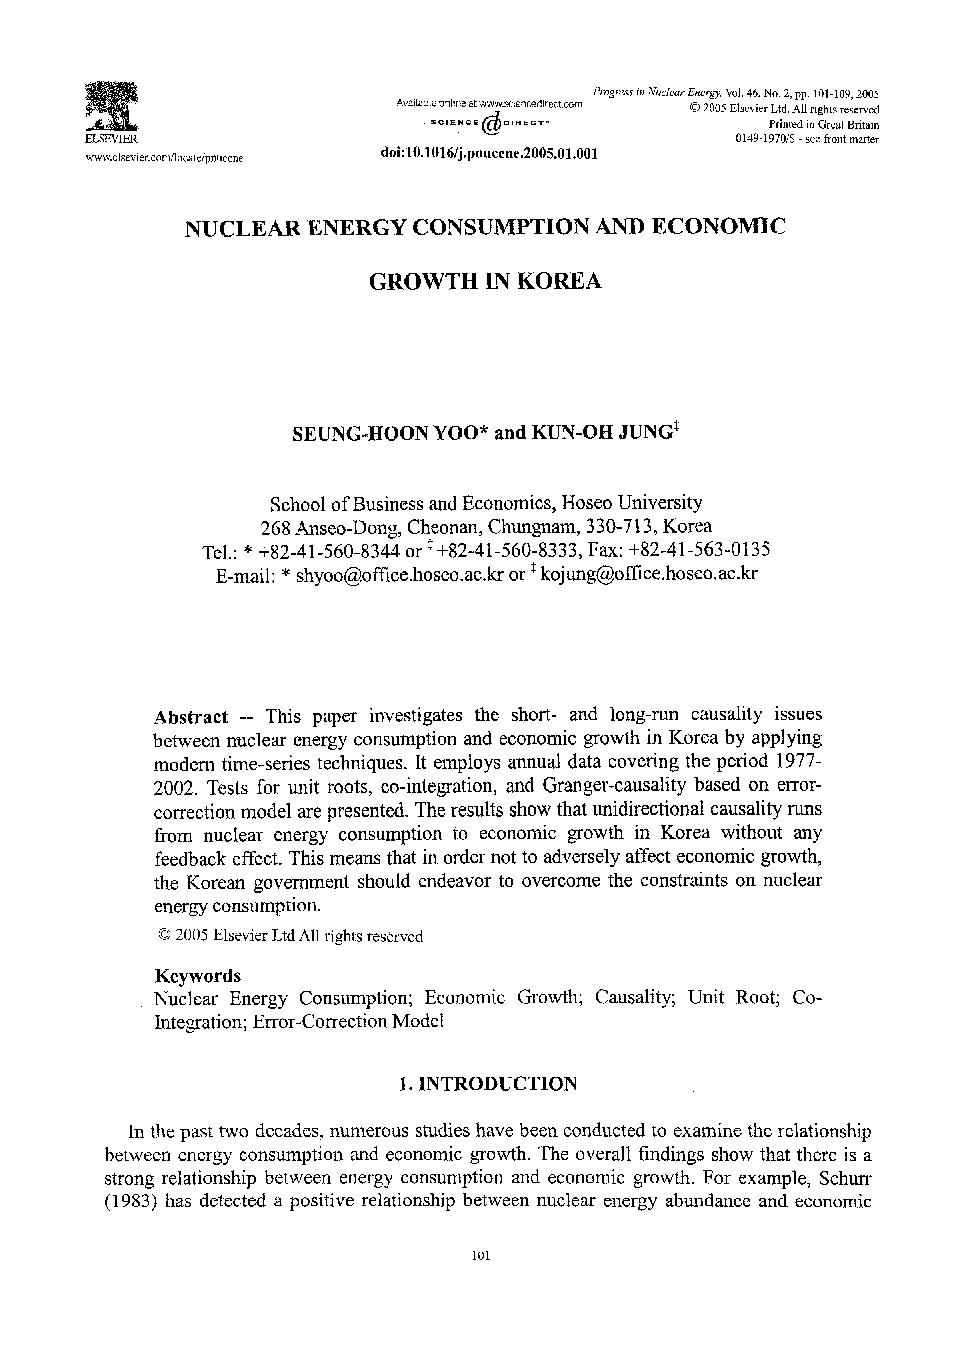 Nuclear energy consumption and economic growth in Korea